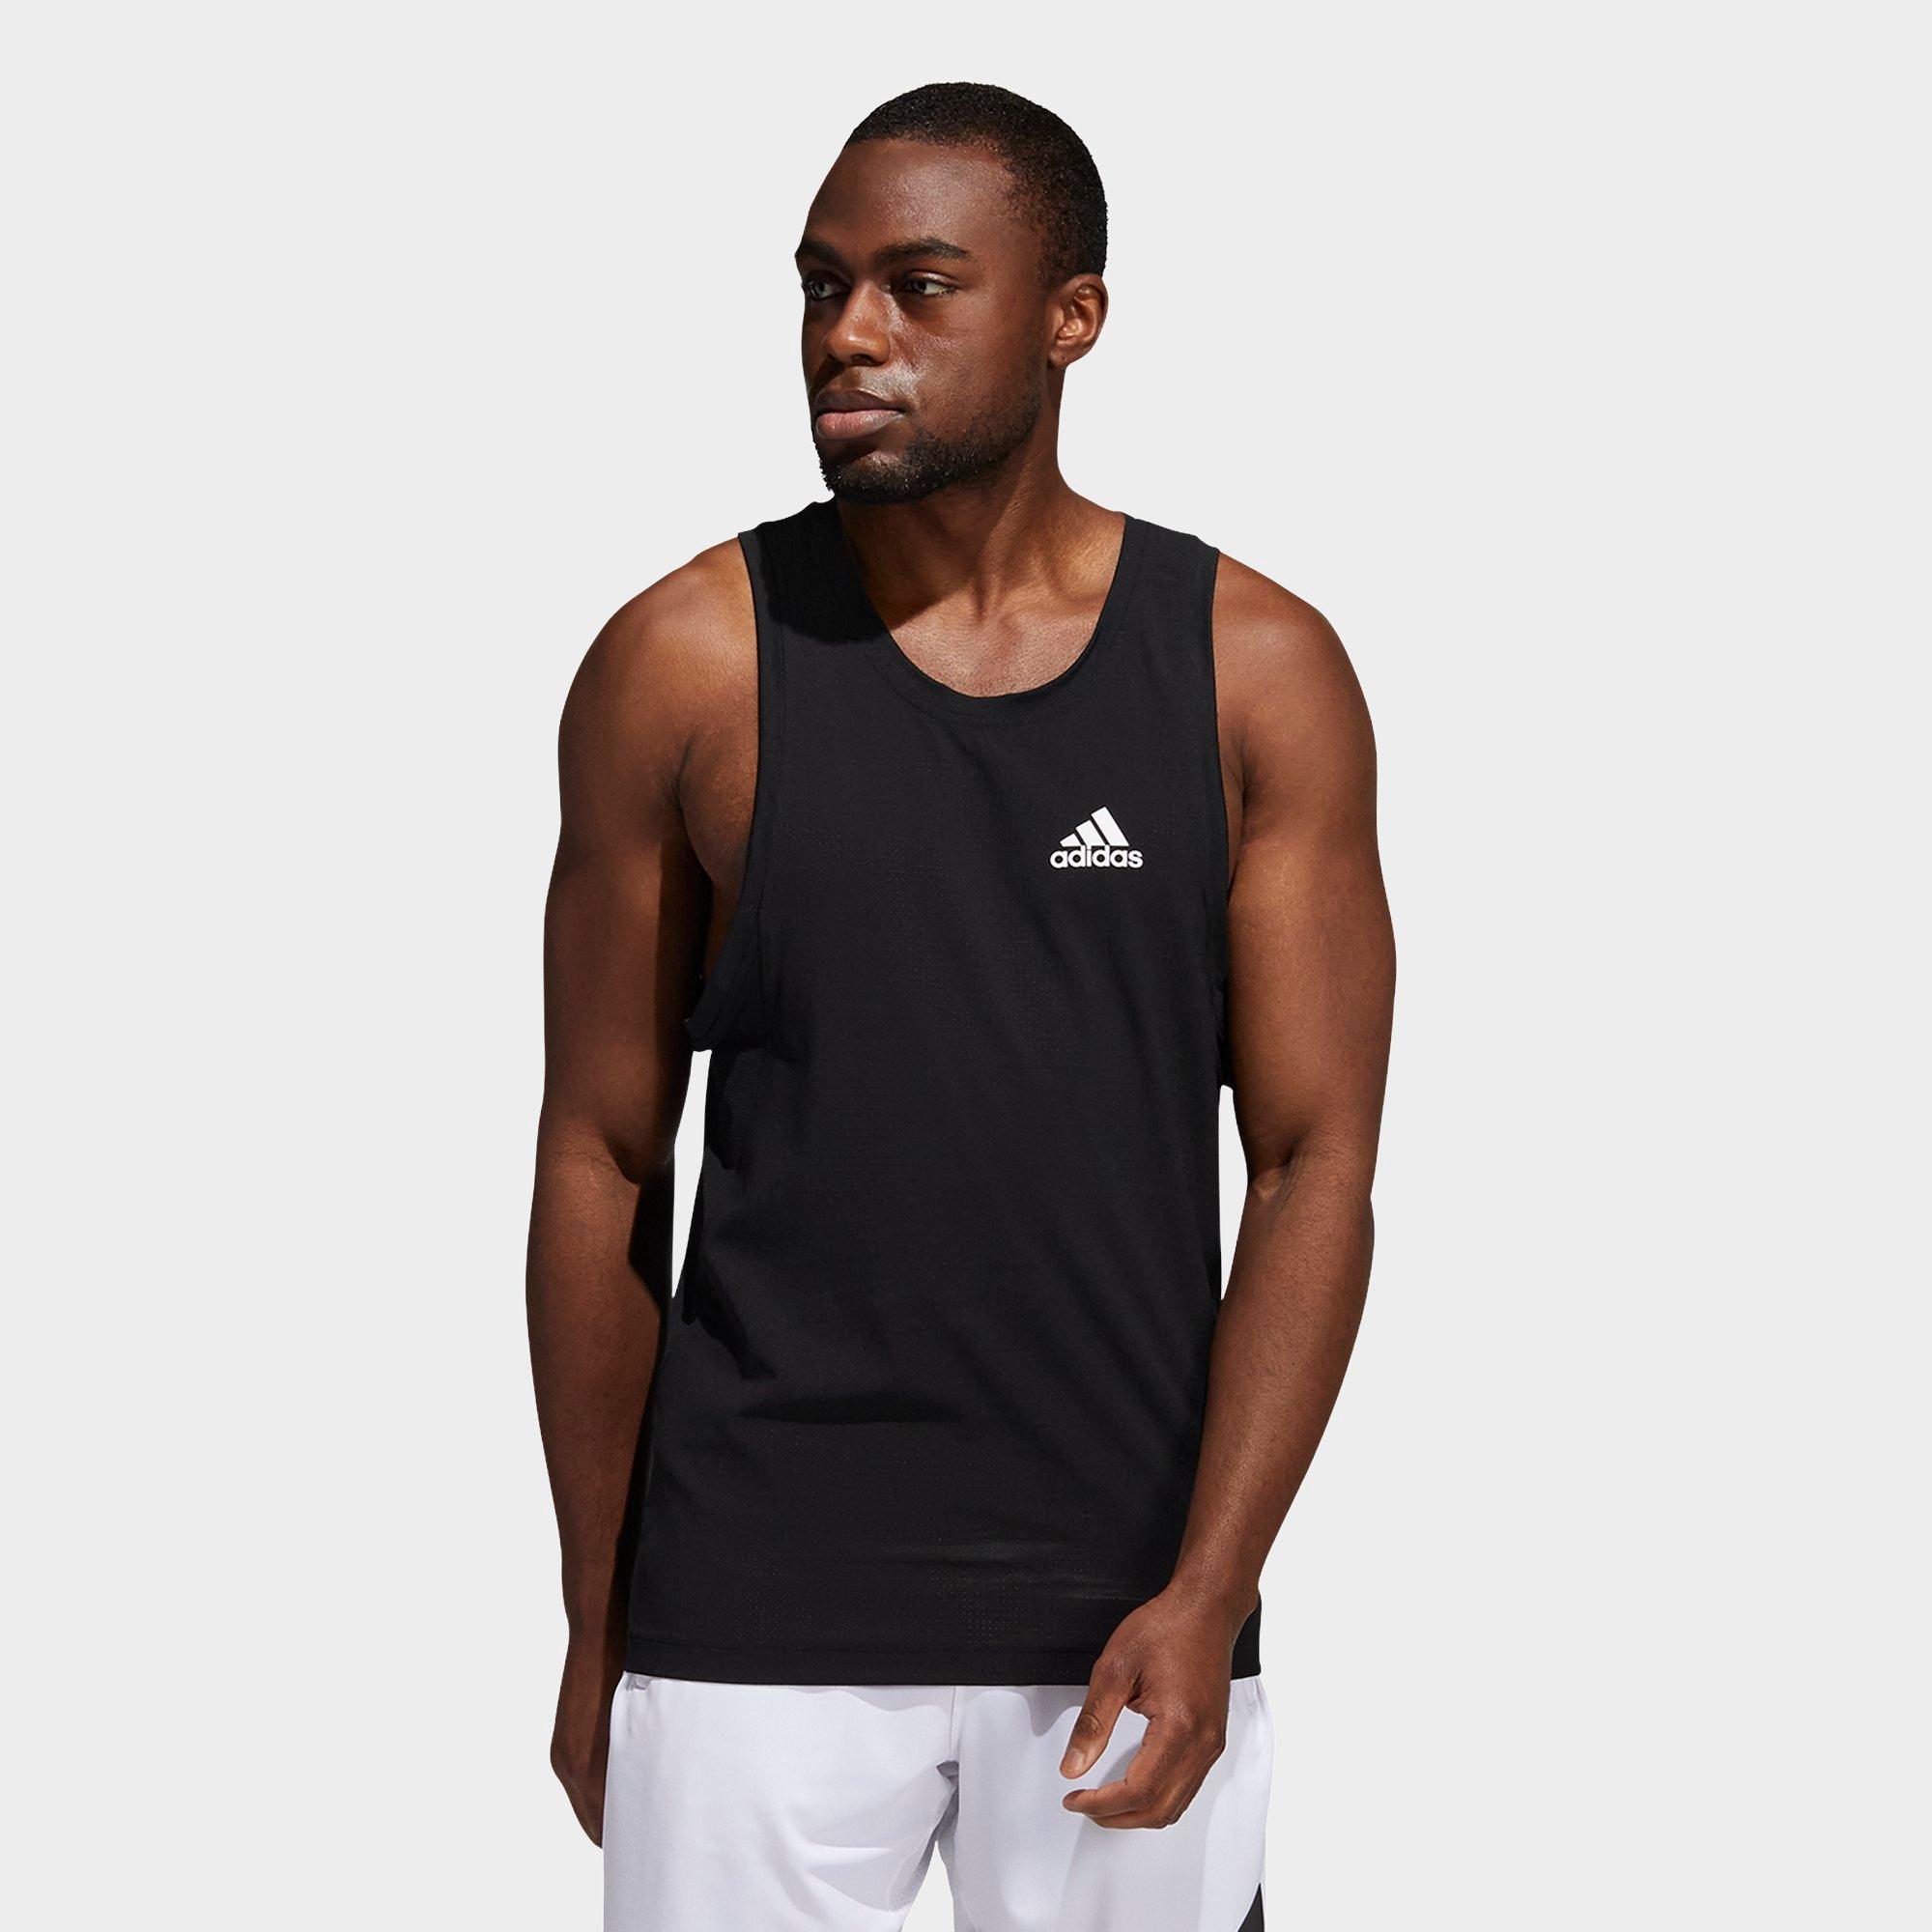 Shop Now For The Adidas Men's Heat. RDY Warrior Woven Tank Top in ...